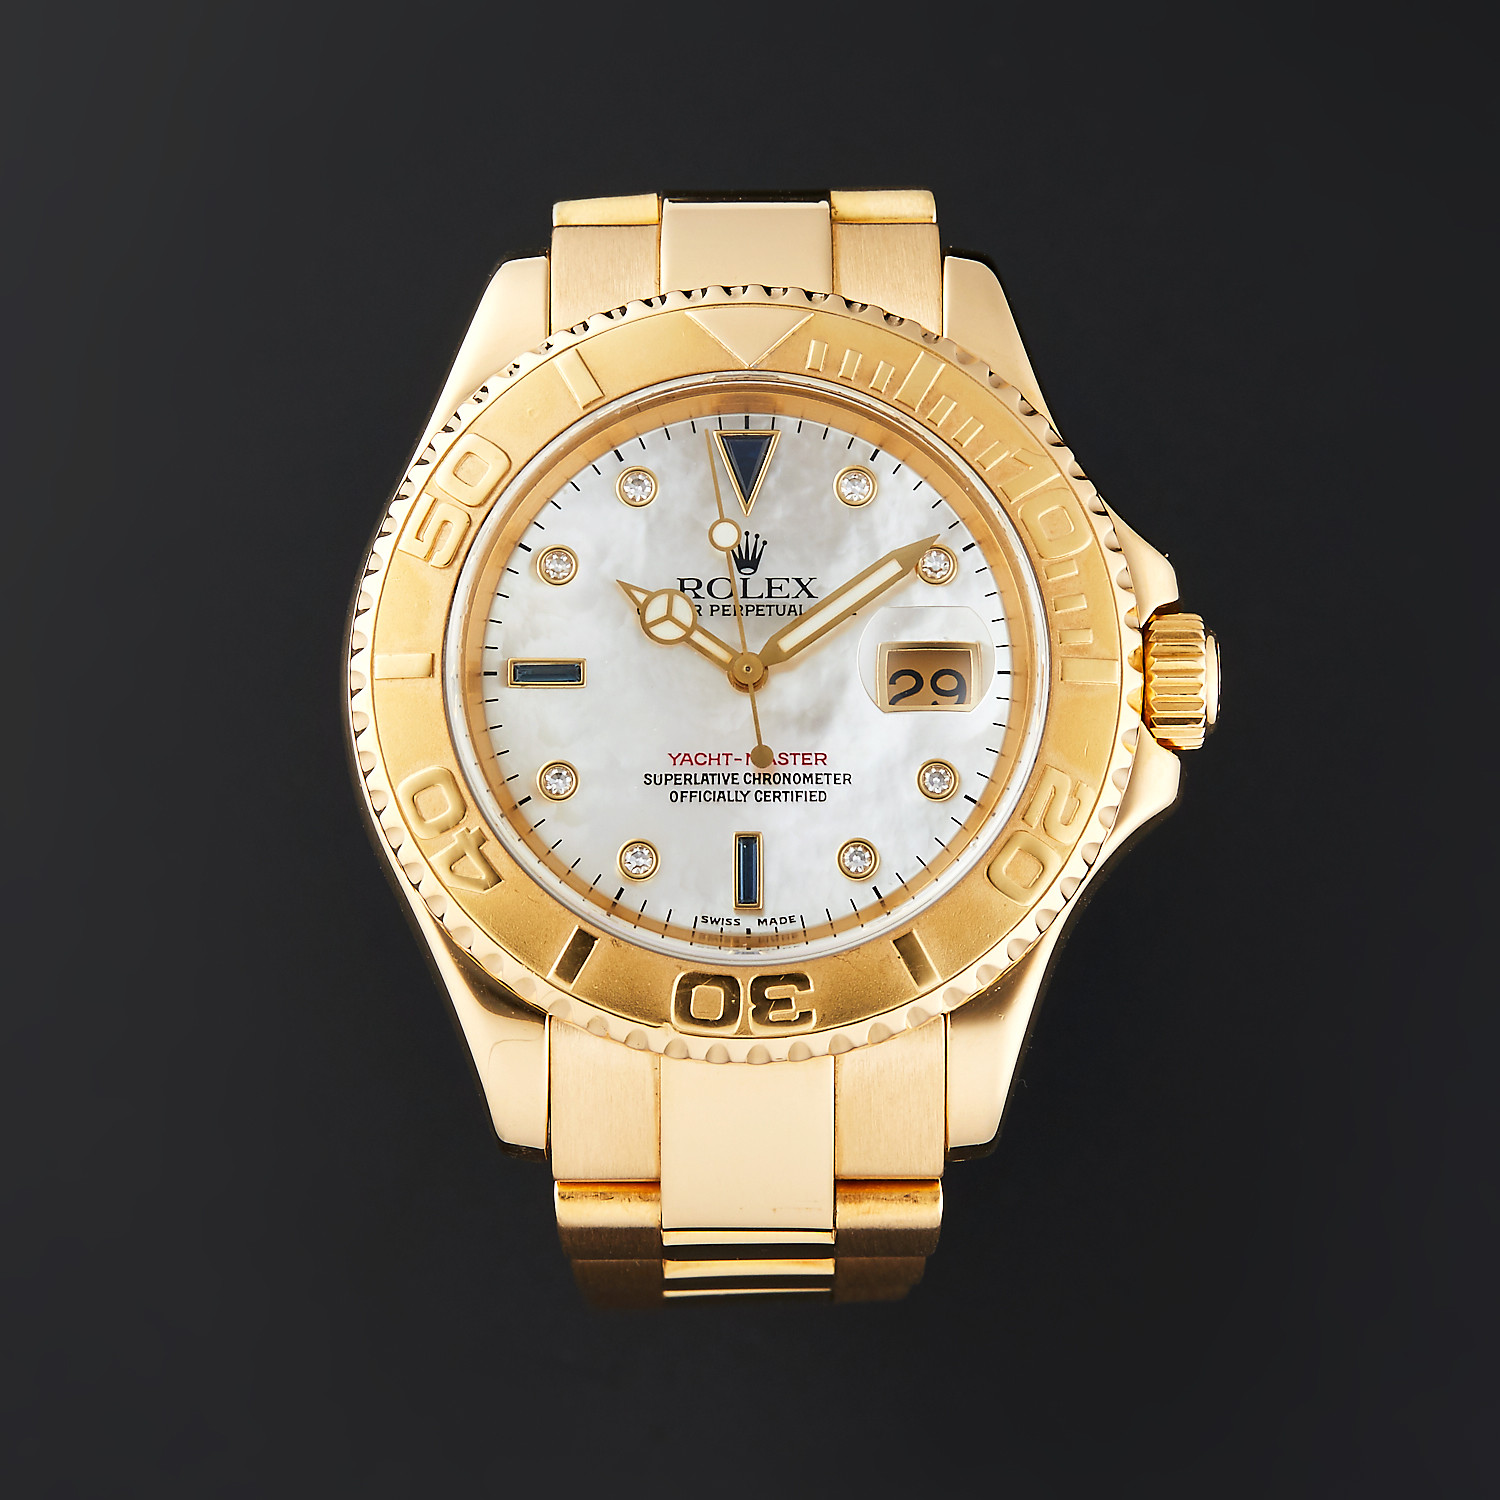 Women's Pre-Owned Rolex Yacht-Master Watches